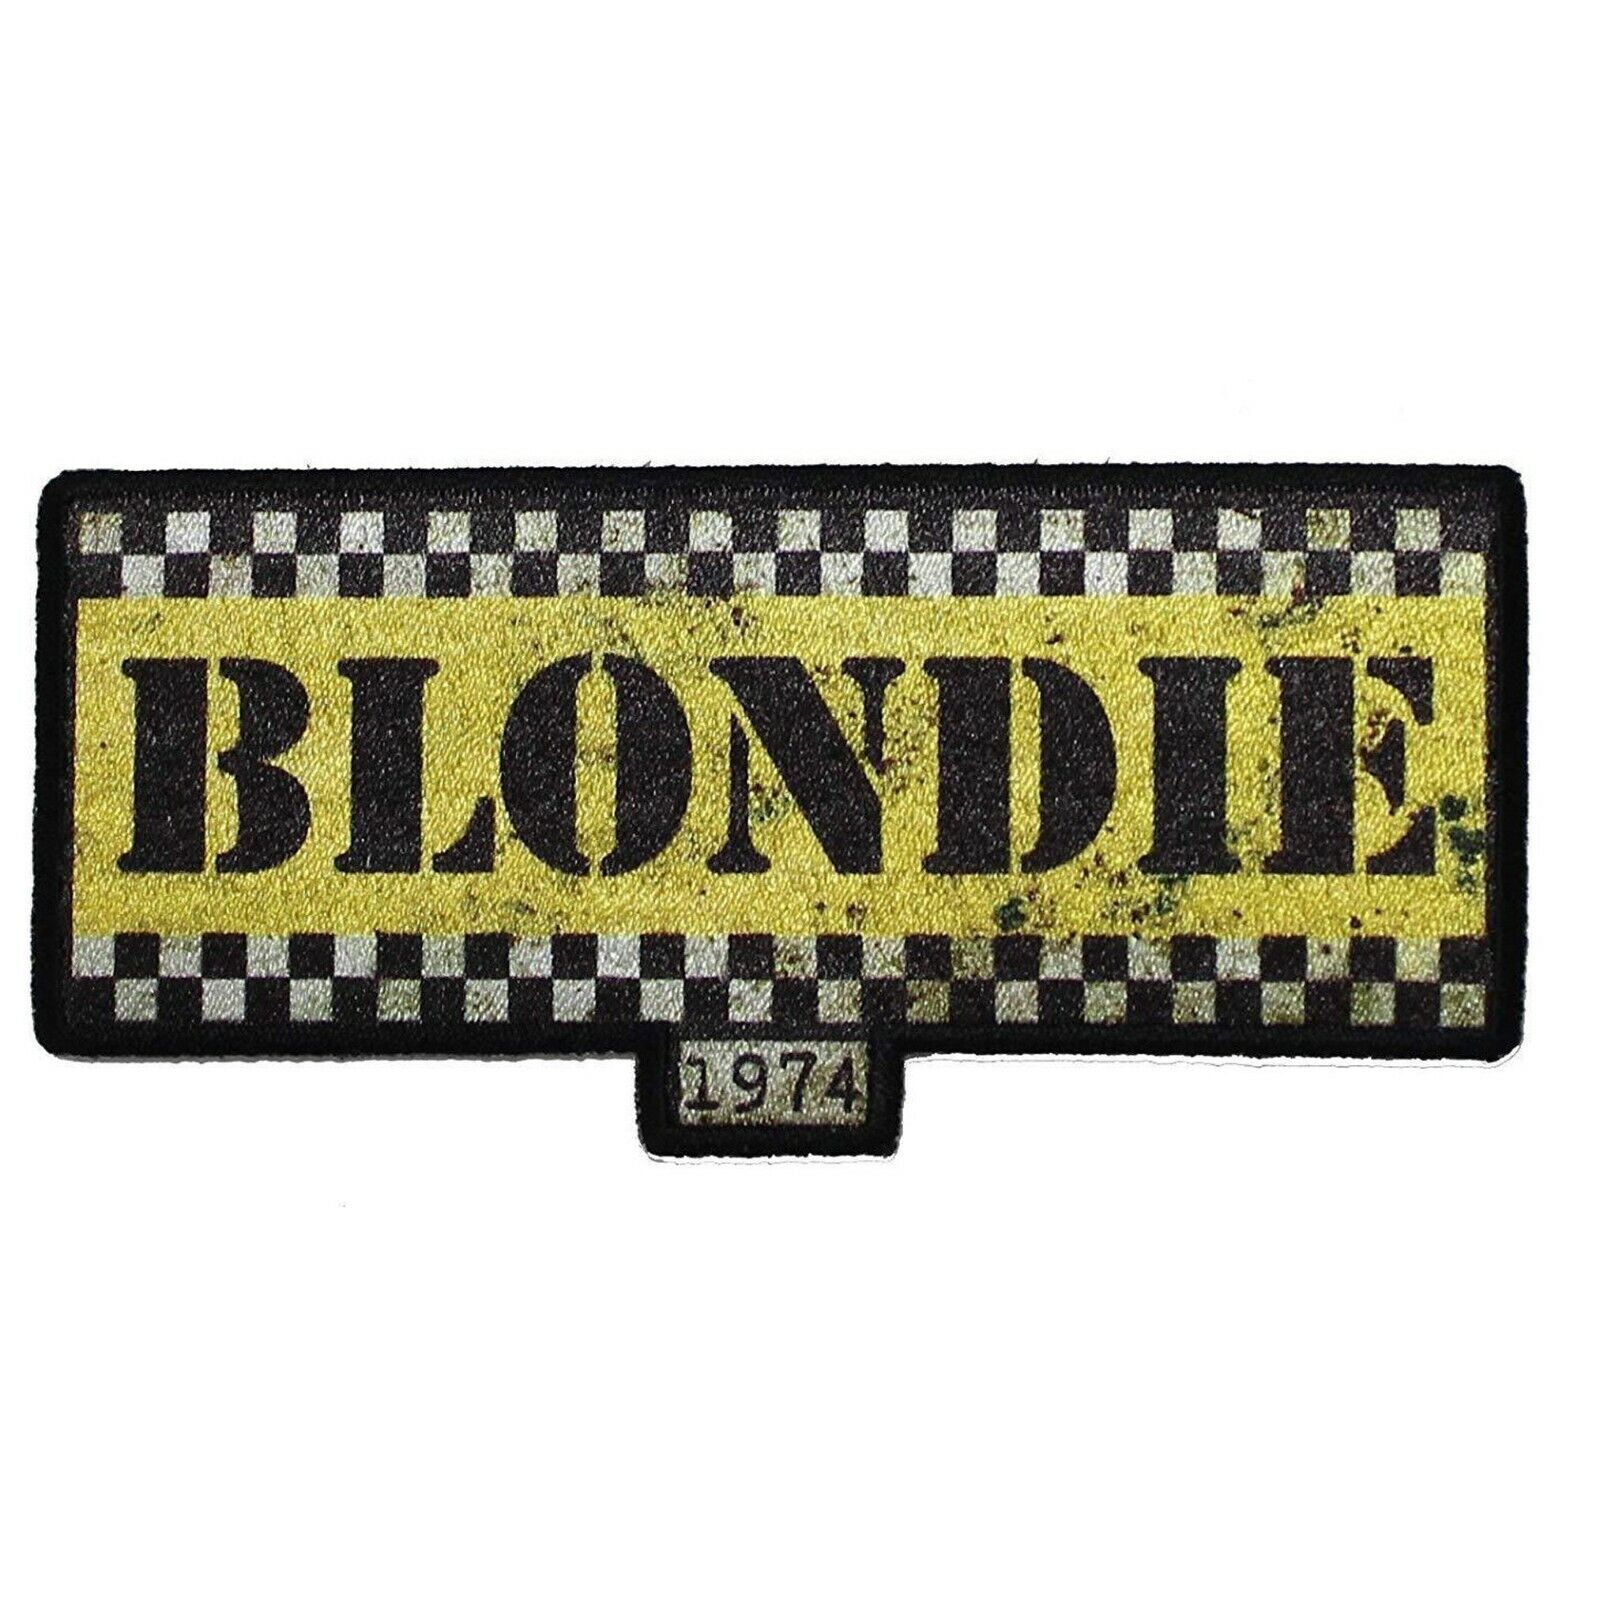 Blondie Taxi Logo Sublimation Iron On Patch - Rock Music Band  059-n